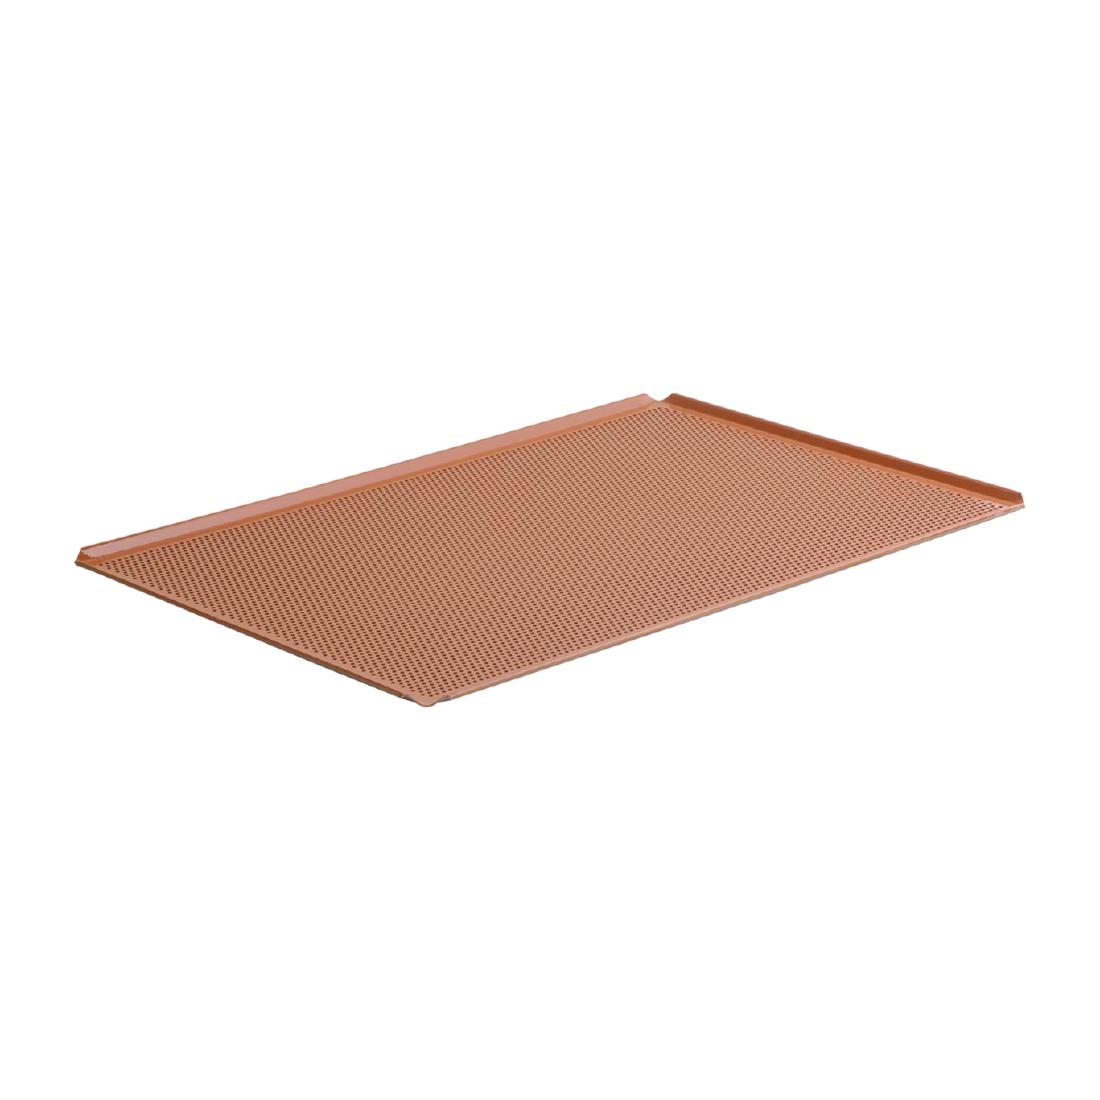 Schneider Non-Stick Perforated Baking Tray 600 x 400mm